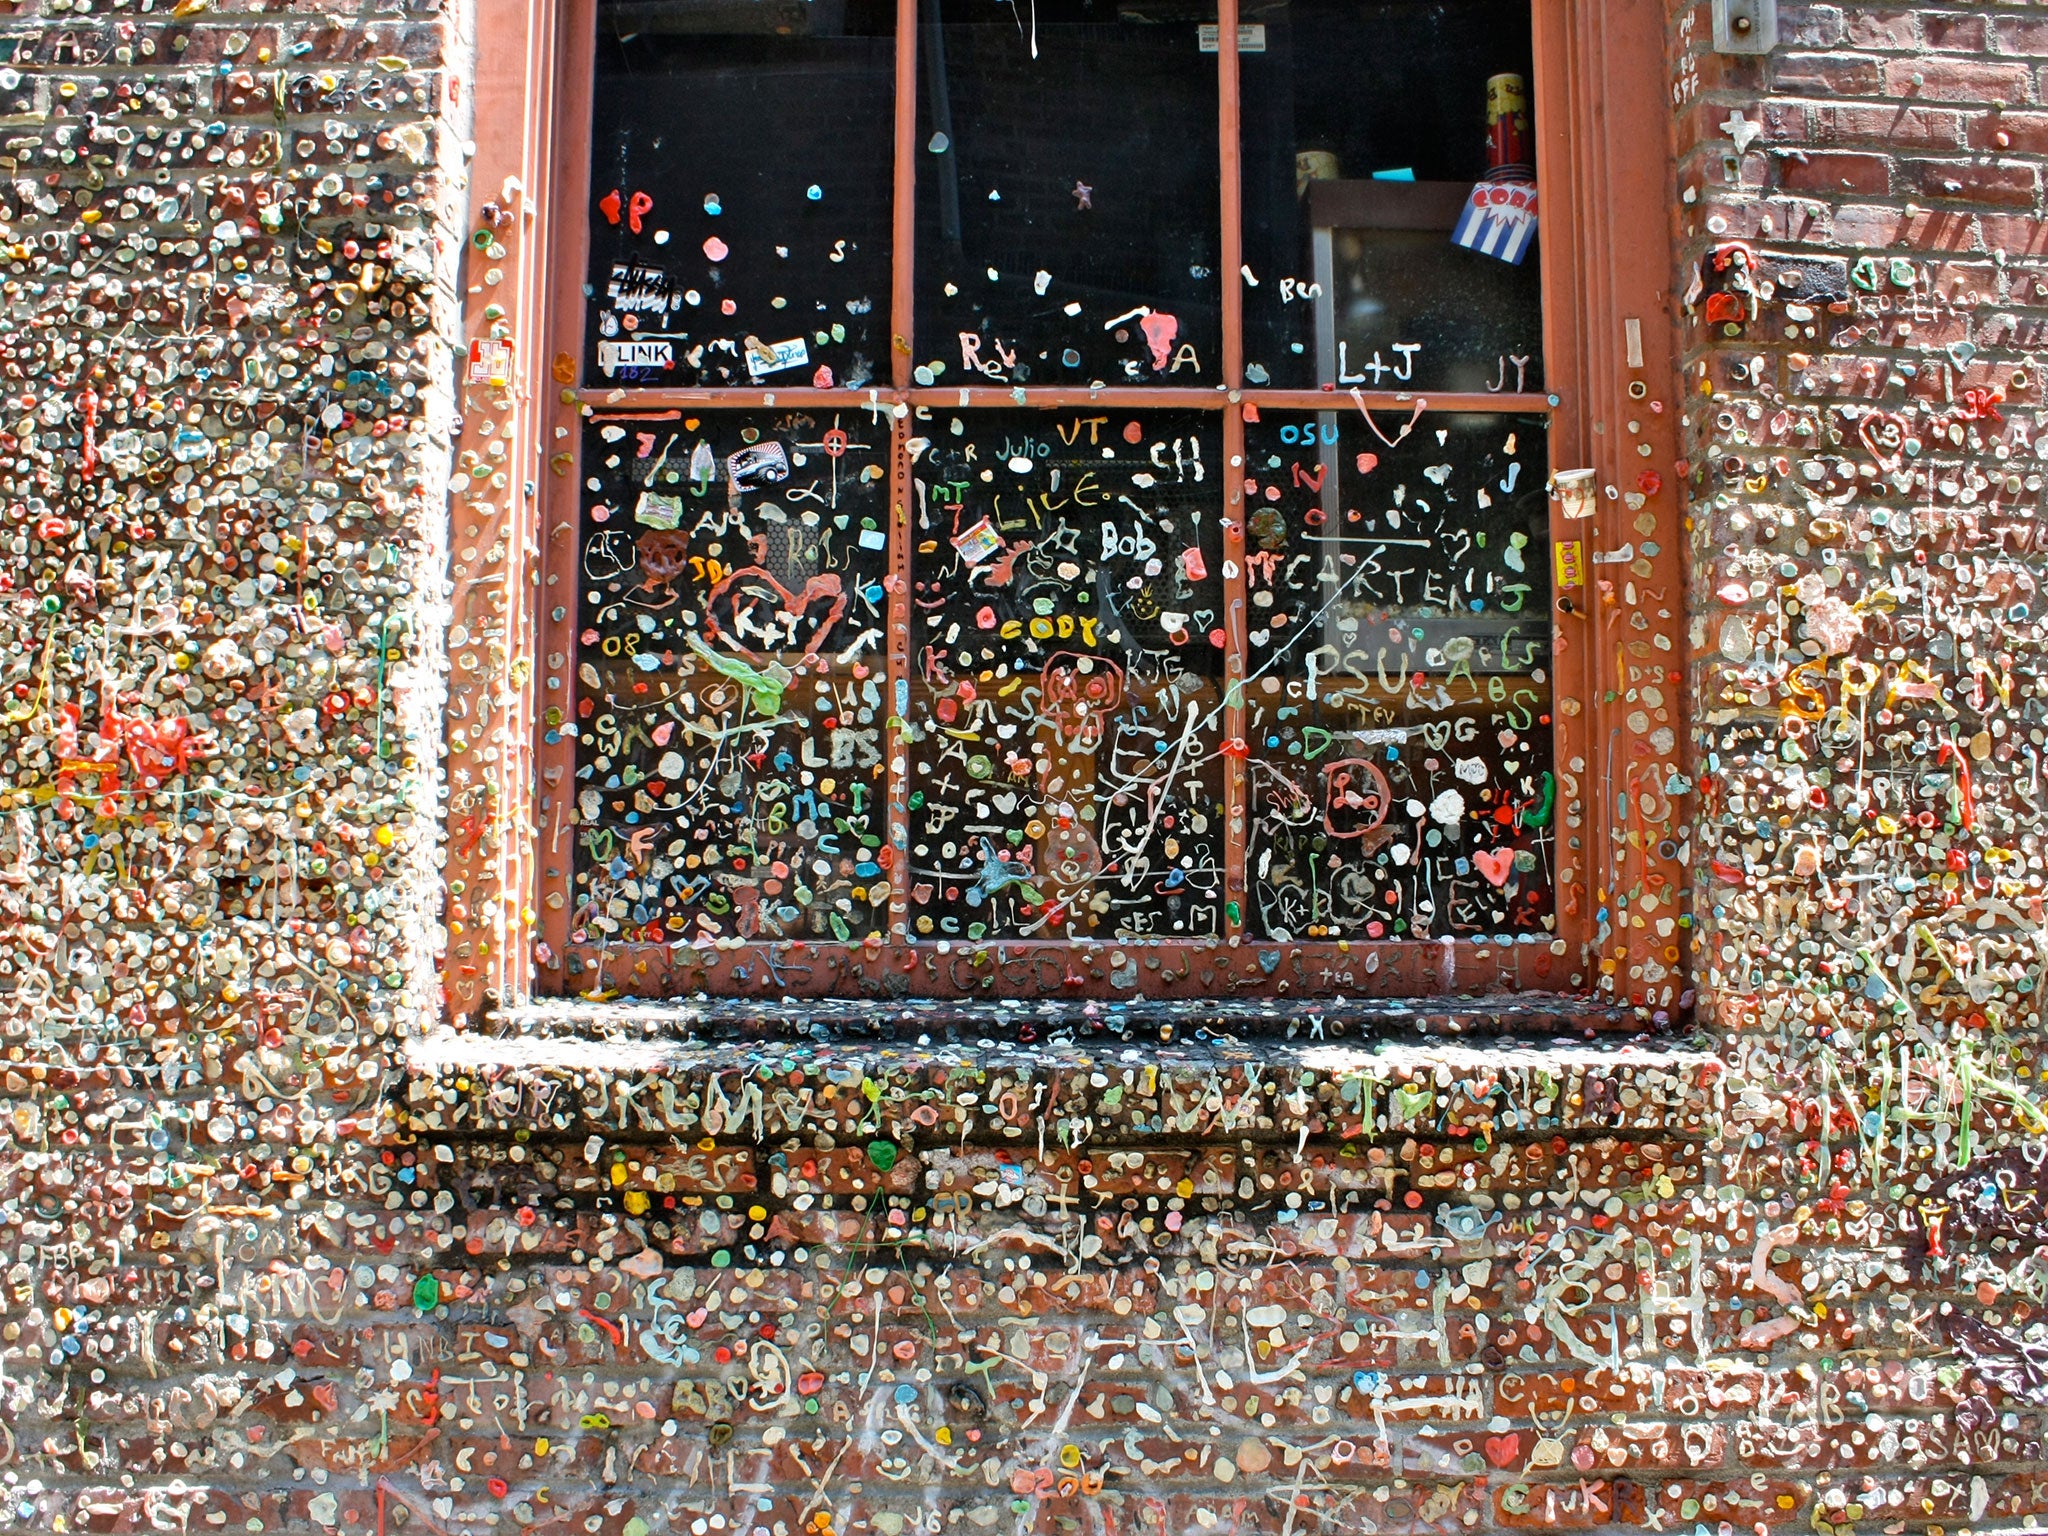 The Market Theater Gum Wall in Seattle, on the west coast